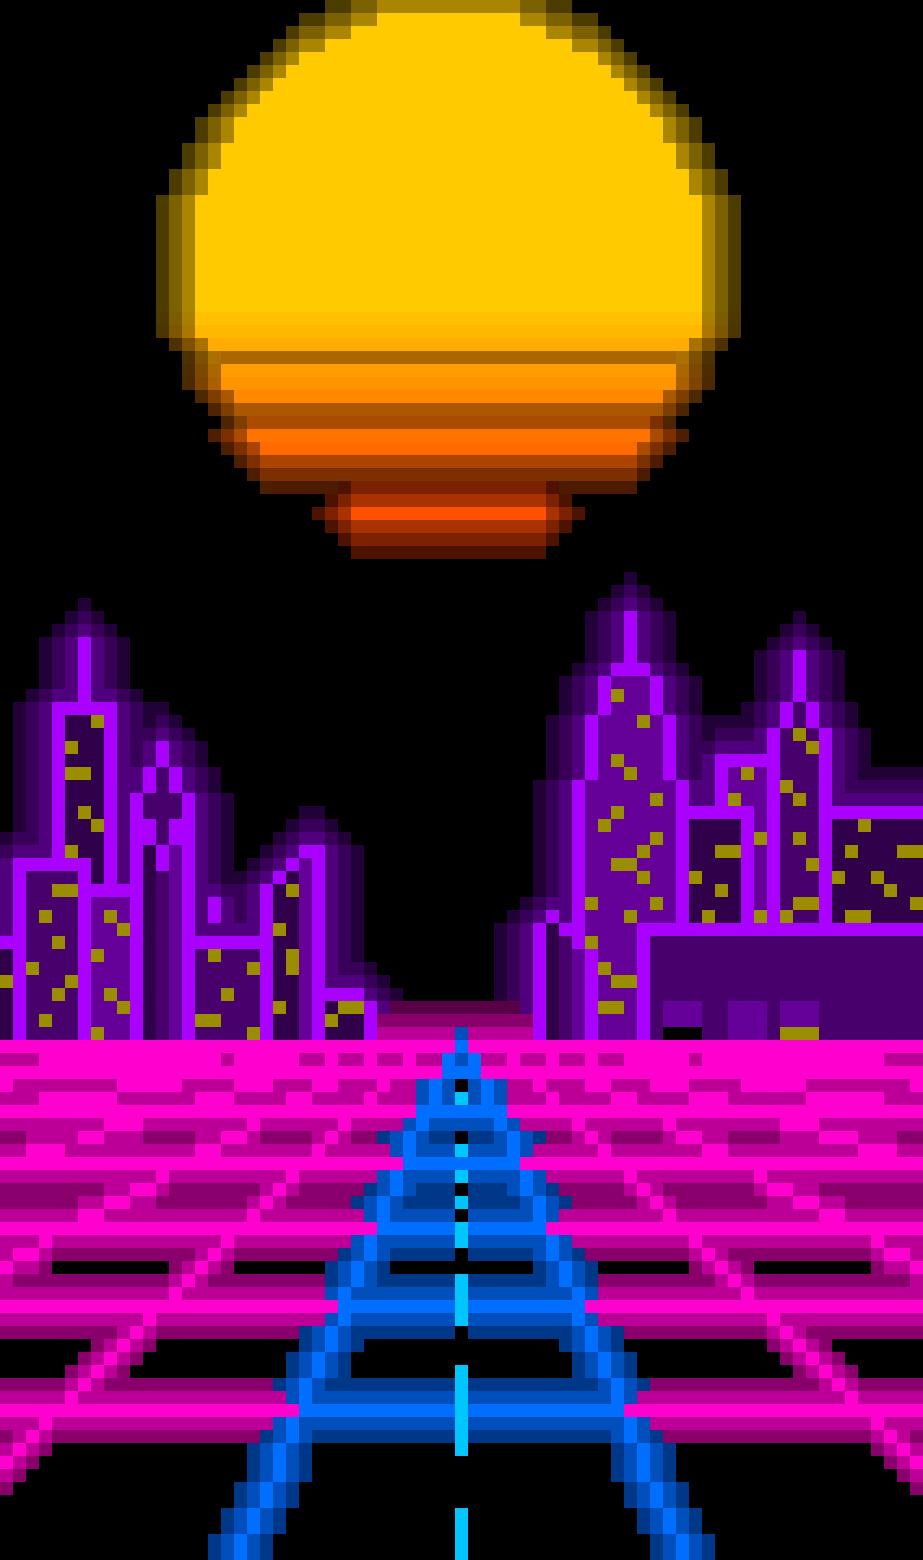 I wanted to make a pixel art outrun phone wallpaper. How did